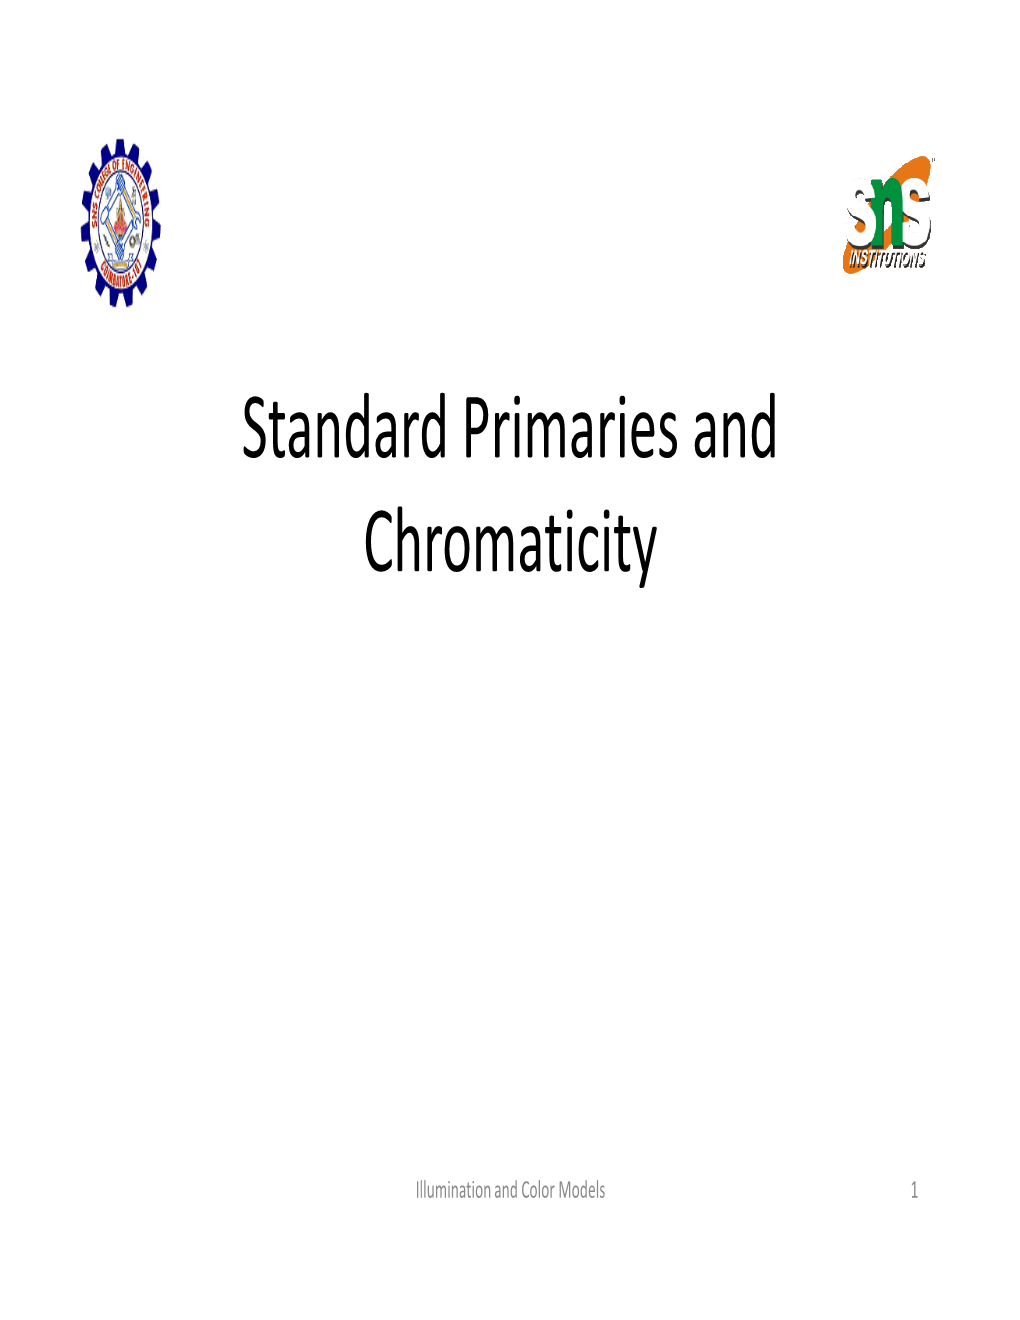 Standard Primaries and Chromaticity